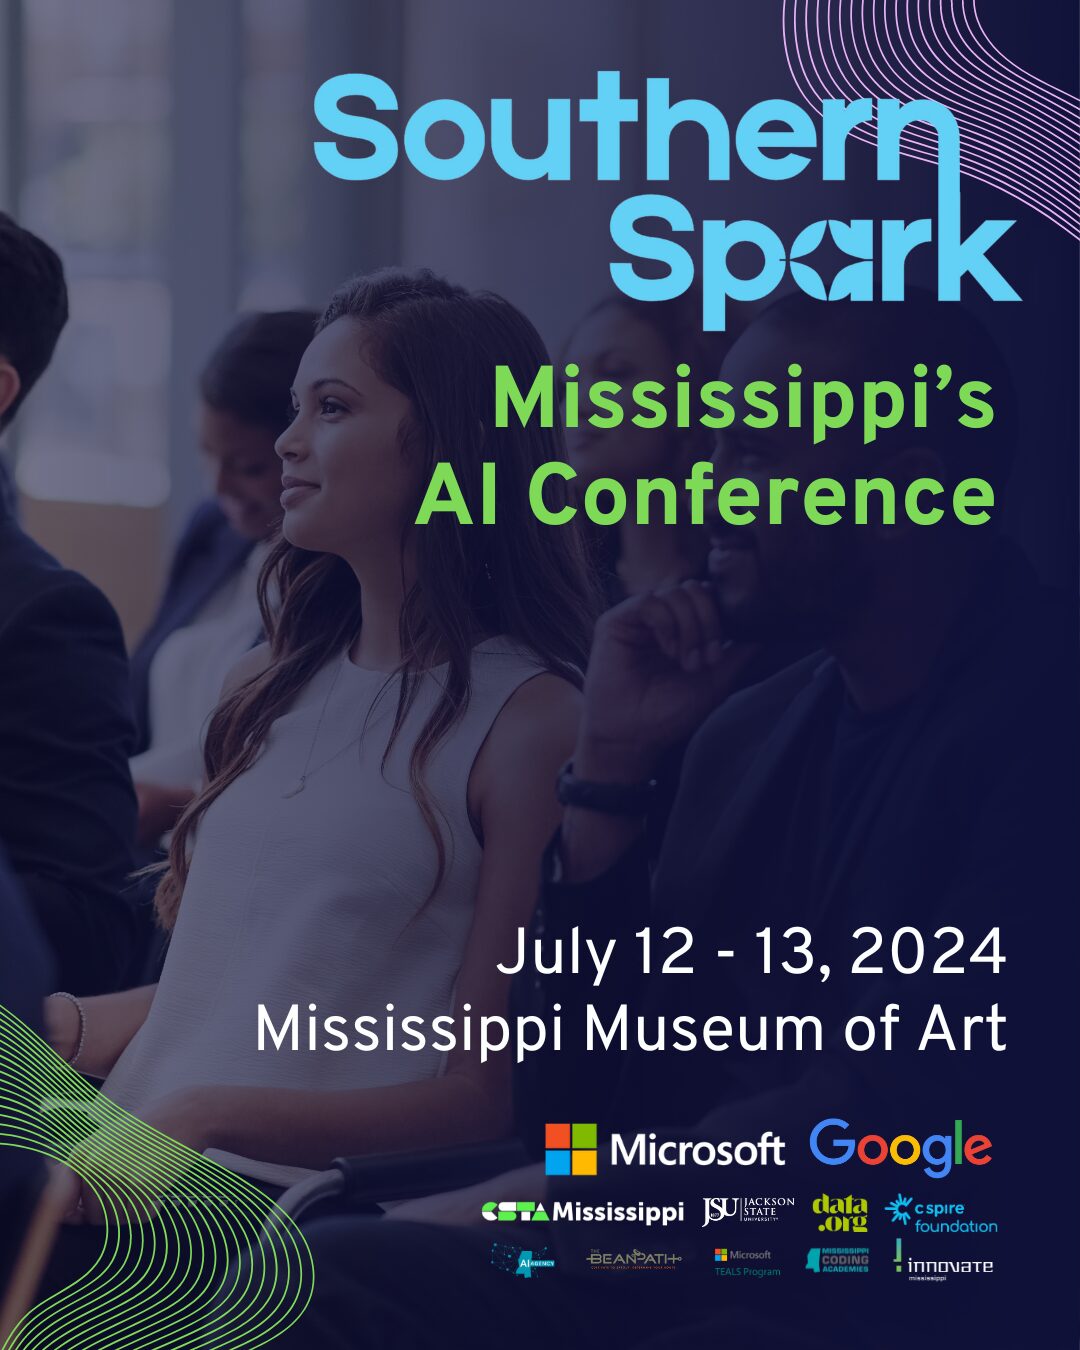 Southern Spark Conference